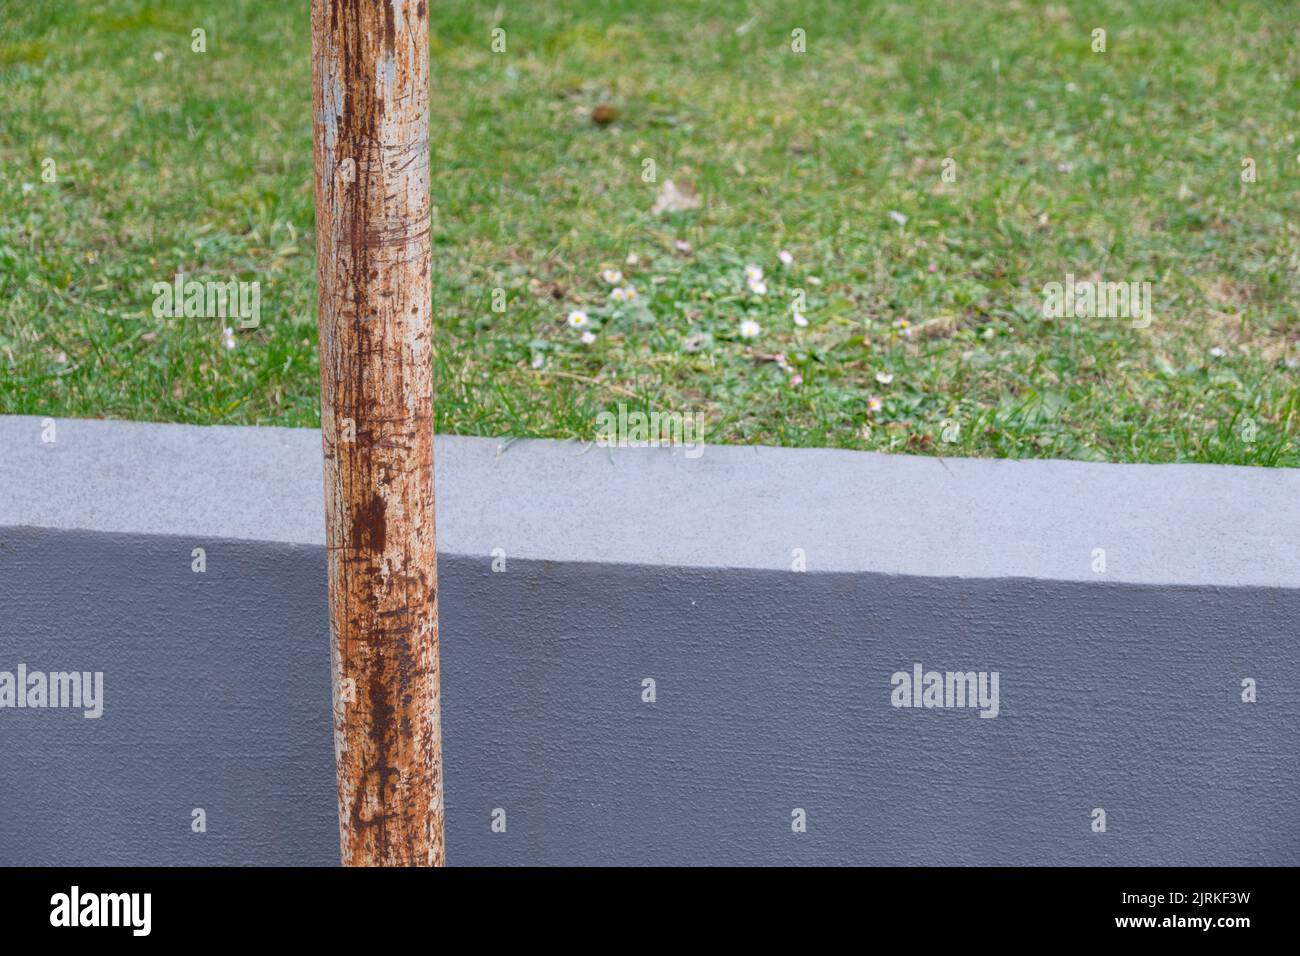 Abstract still life with a rusty old signpost, green grass and a grey concrete wall. Seen in Germany in February. Stock Photo